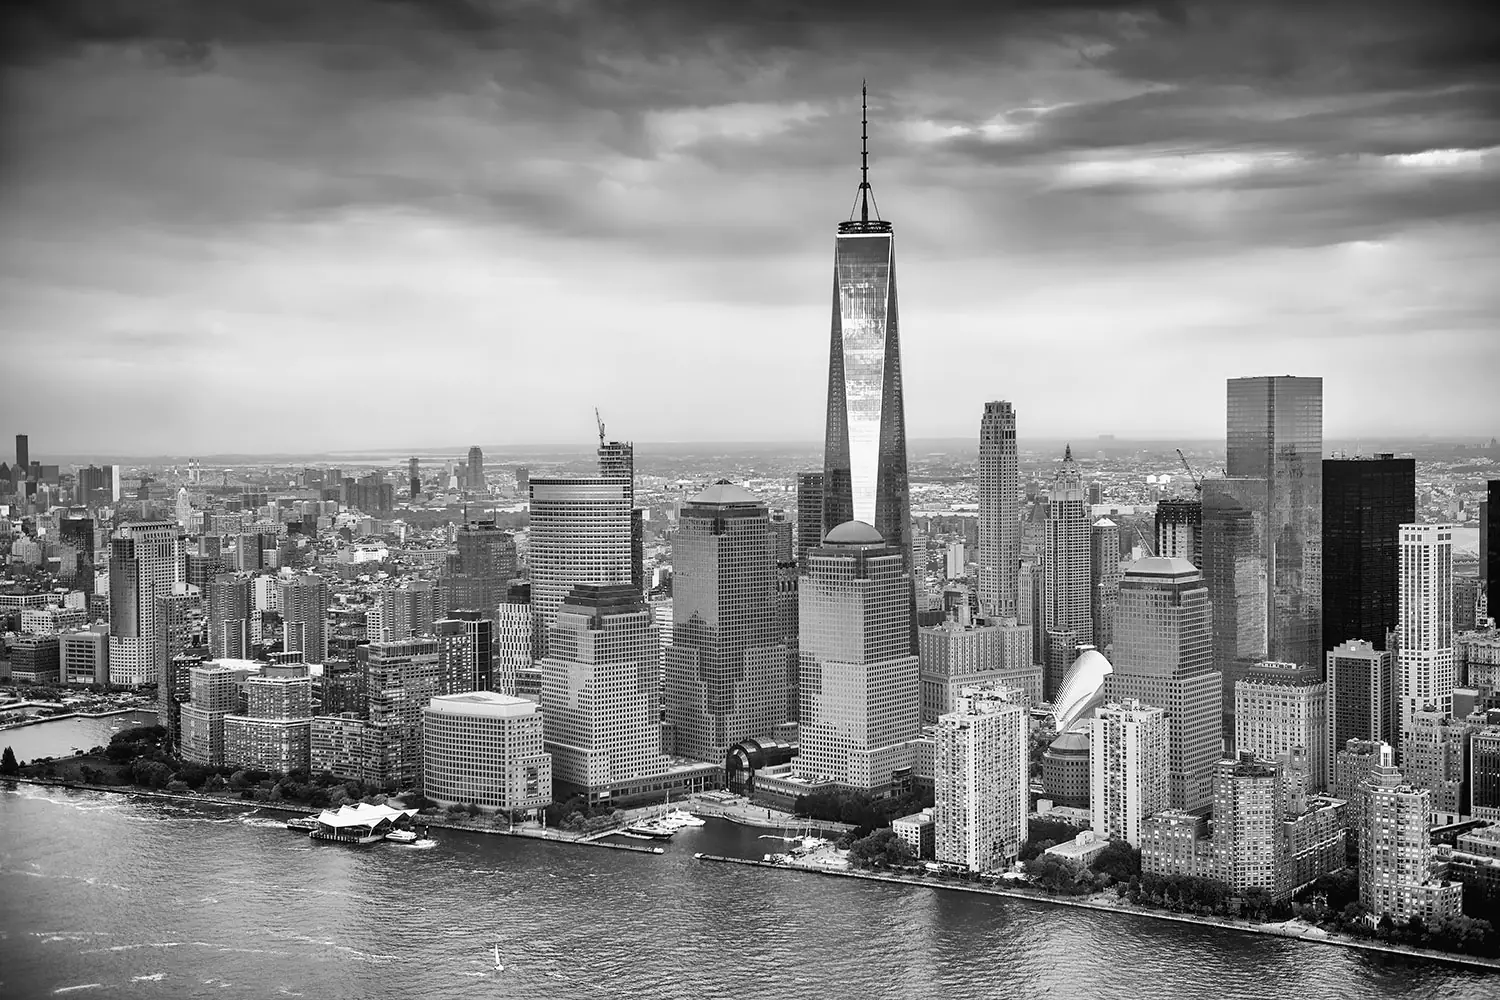 Wall Mural Photo Wallpaper Skyline Black And White Photography New York